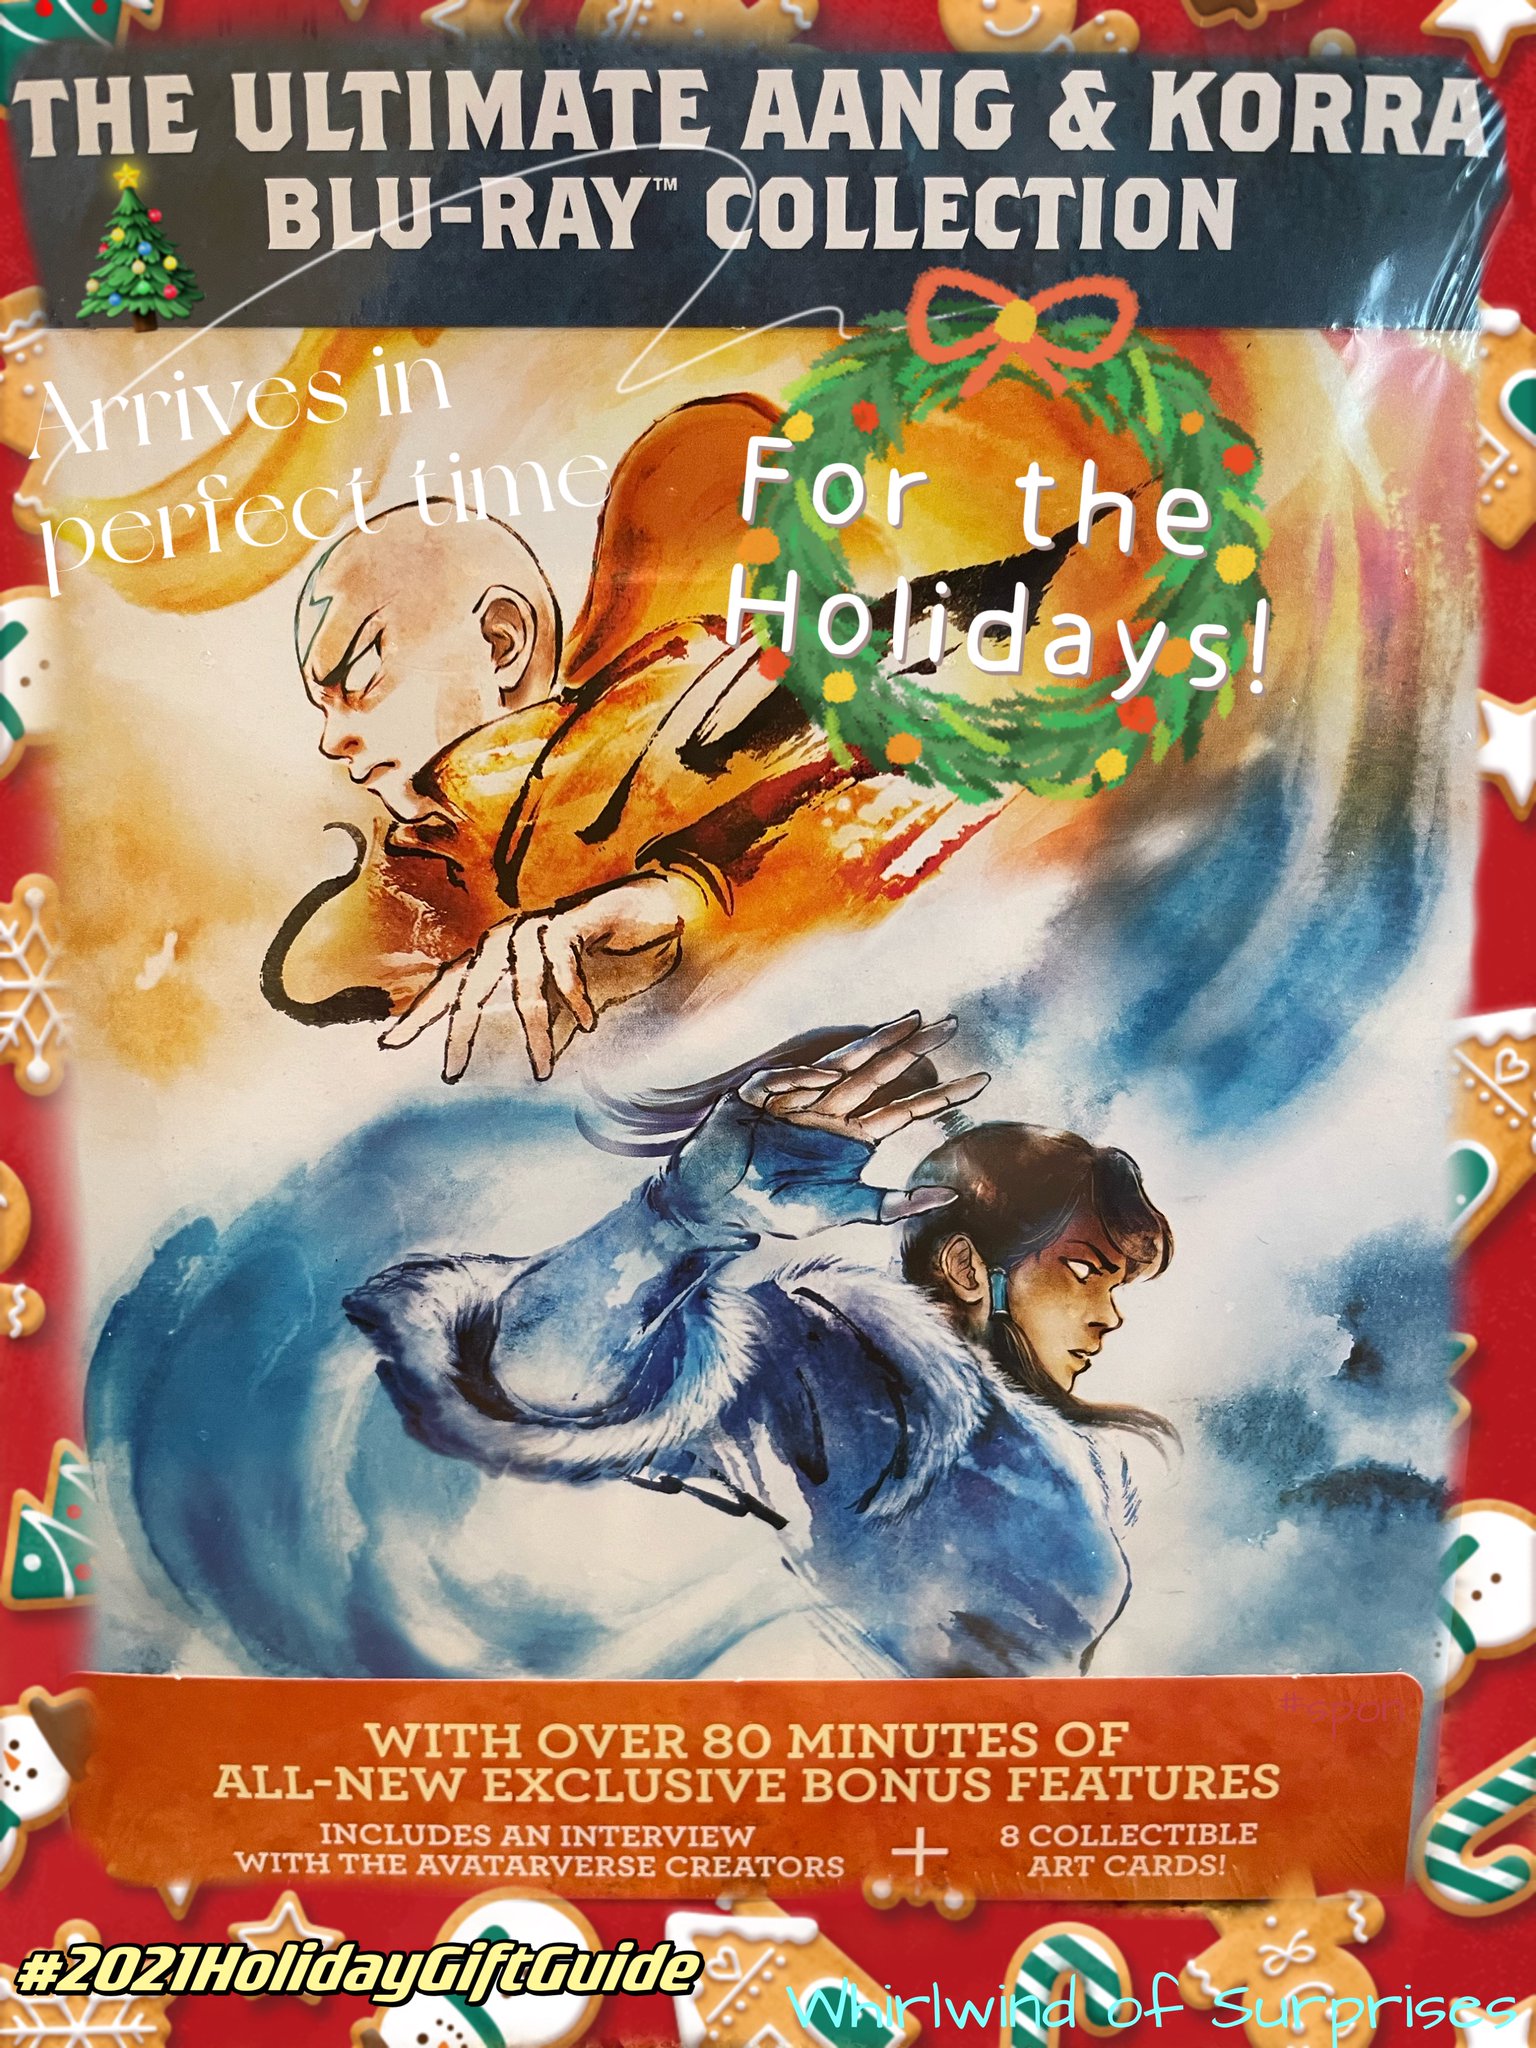 Great Holiday gift for Airbender Fans